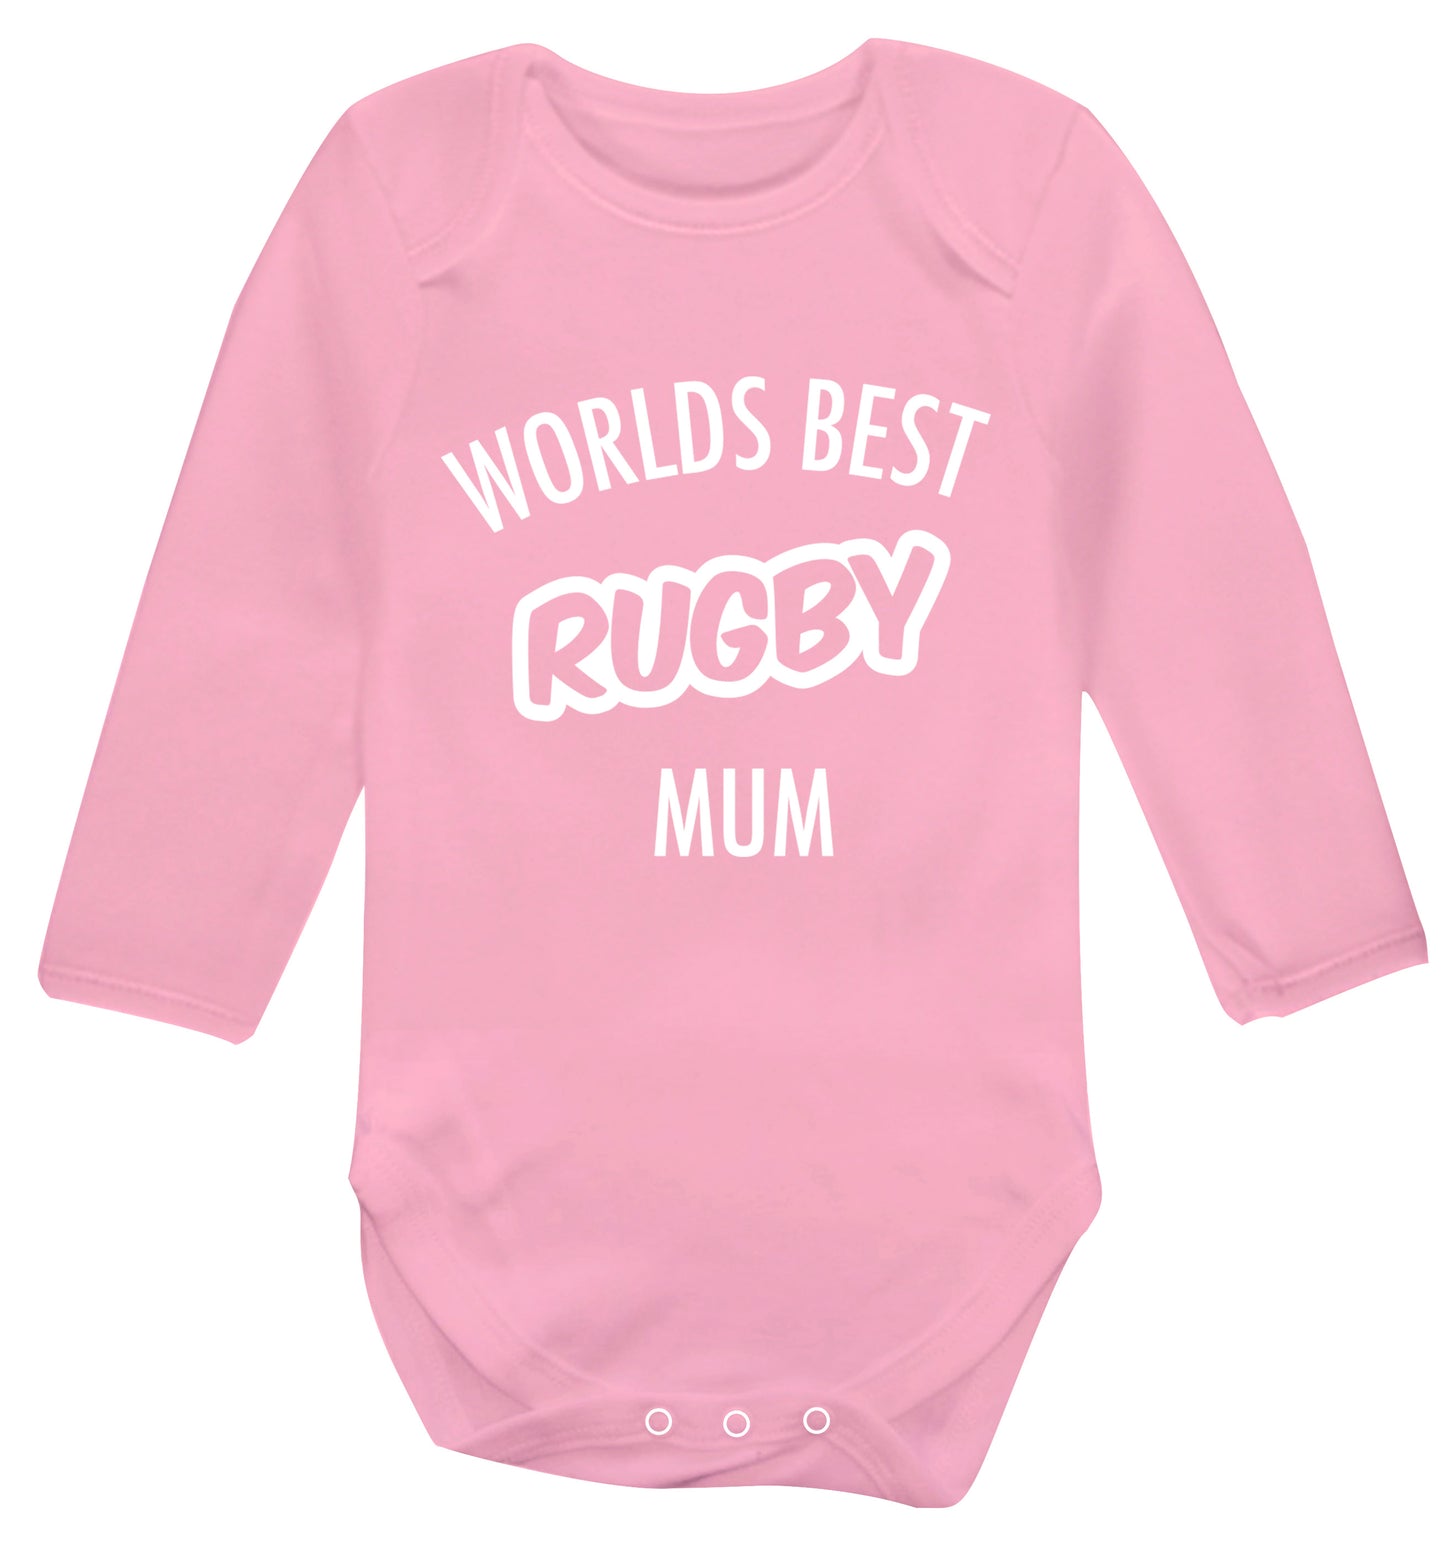 Worlds best rugby mum Baby Vest long sleeved pale pink 6-12 months